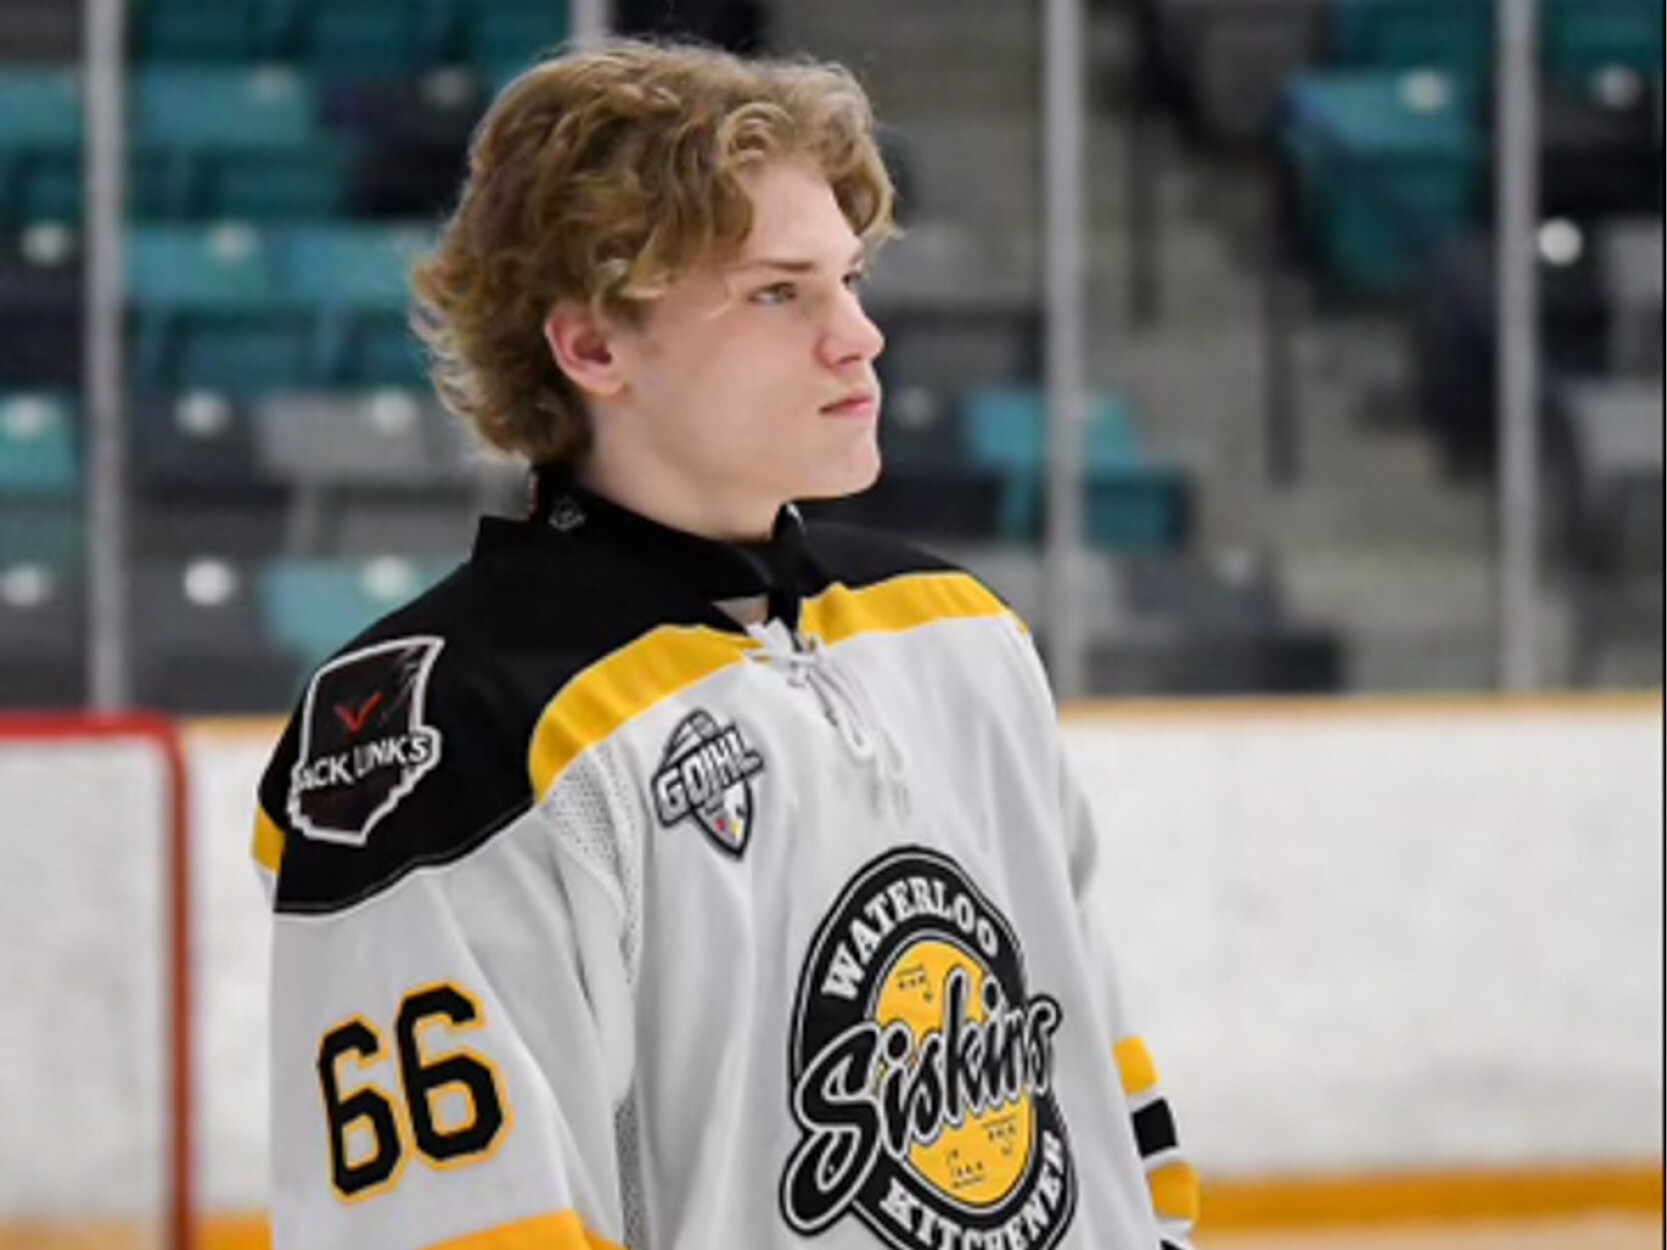 A blond hockey player with number 66 on his jersey 